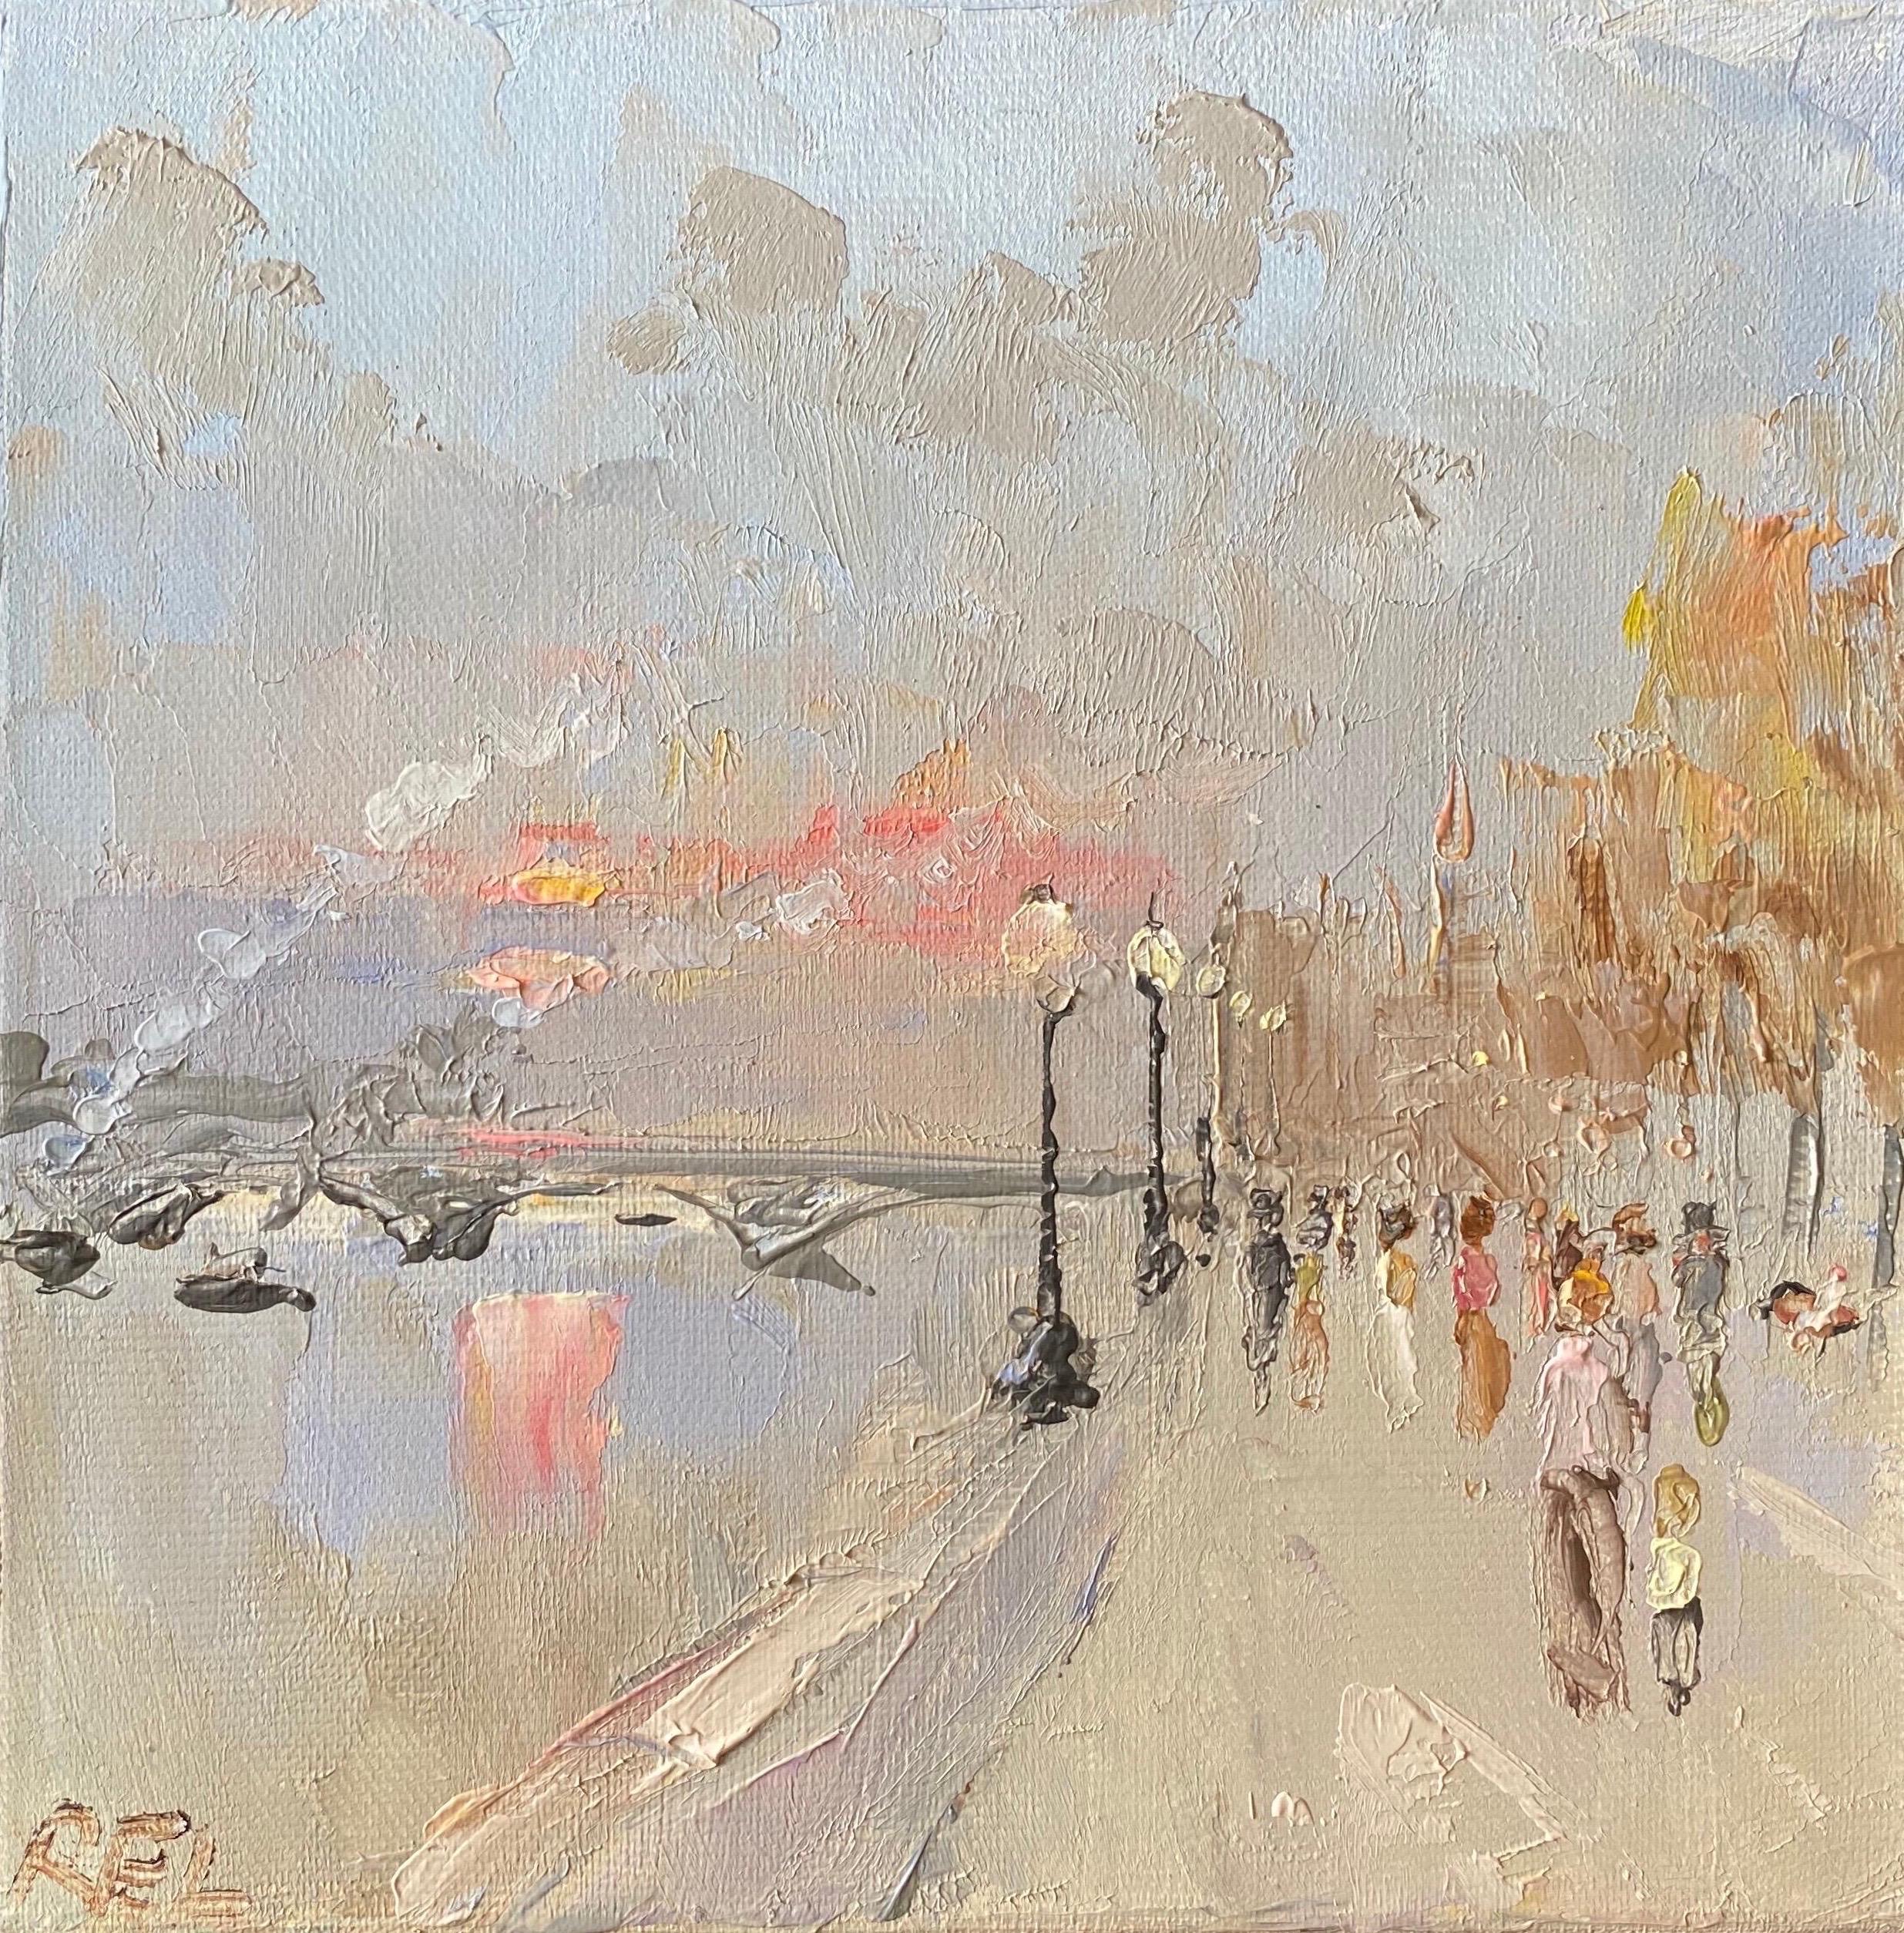 English Impressionist Landscape Painting - Figures Walking by the River Seine Paris, early evening pink sunset sky